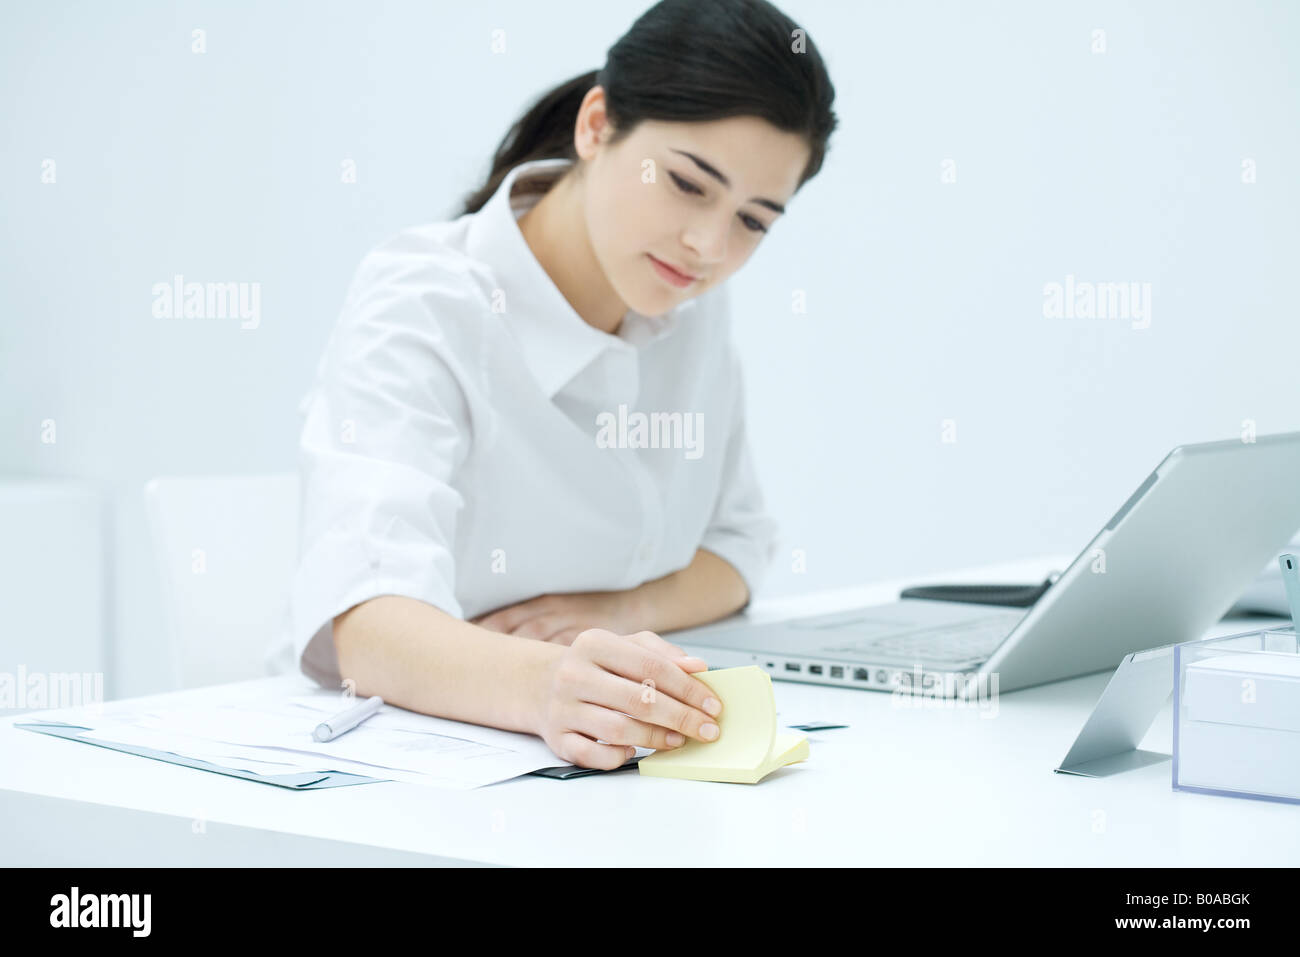 Young woman sitting at desk, flipping through adhesive note block Stock Photo